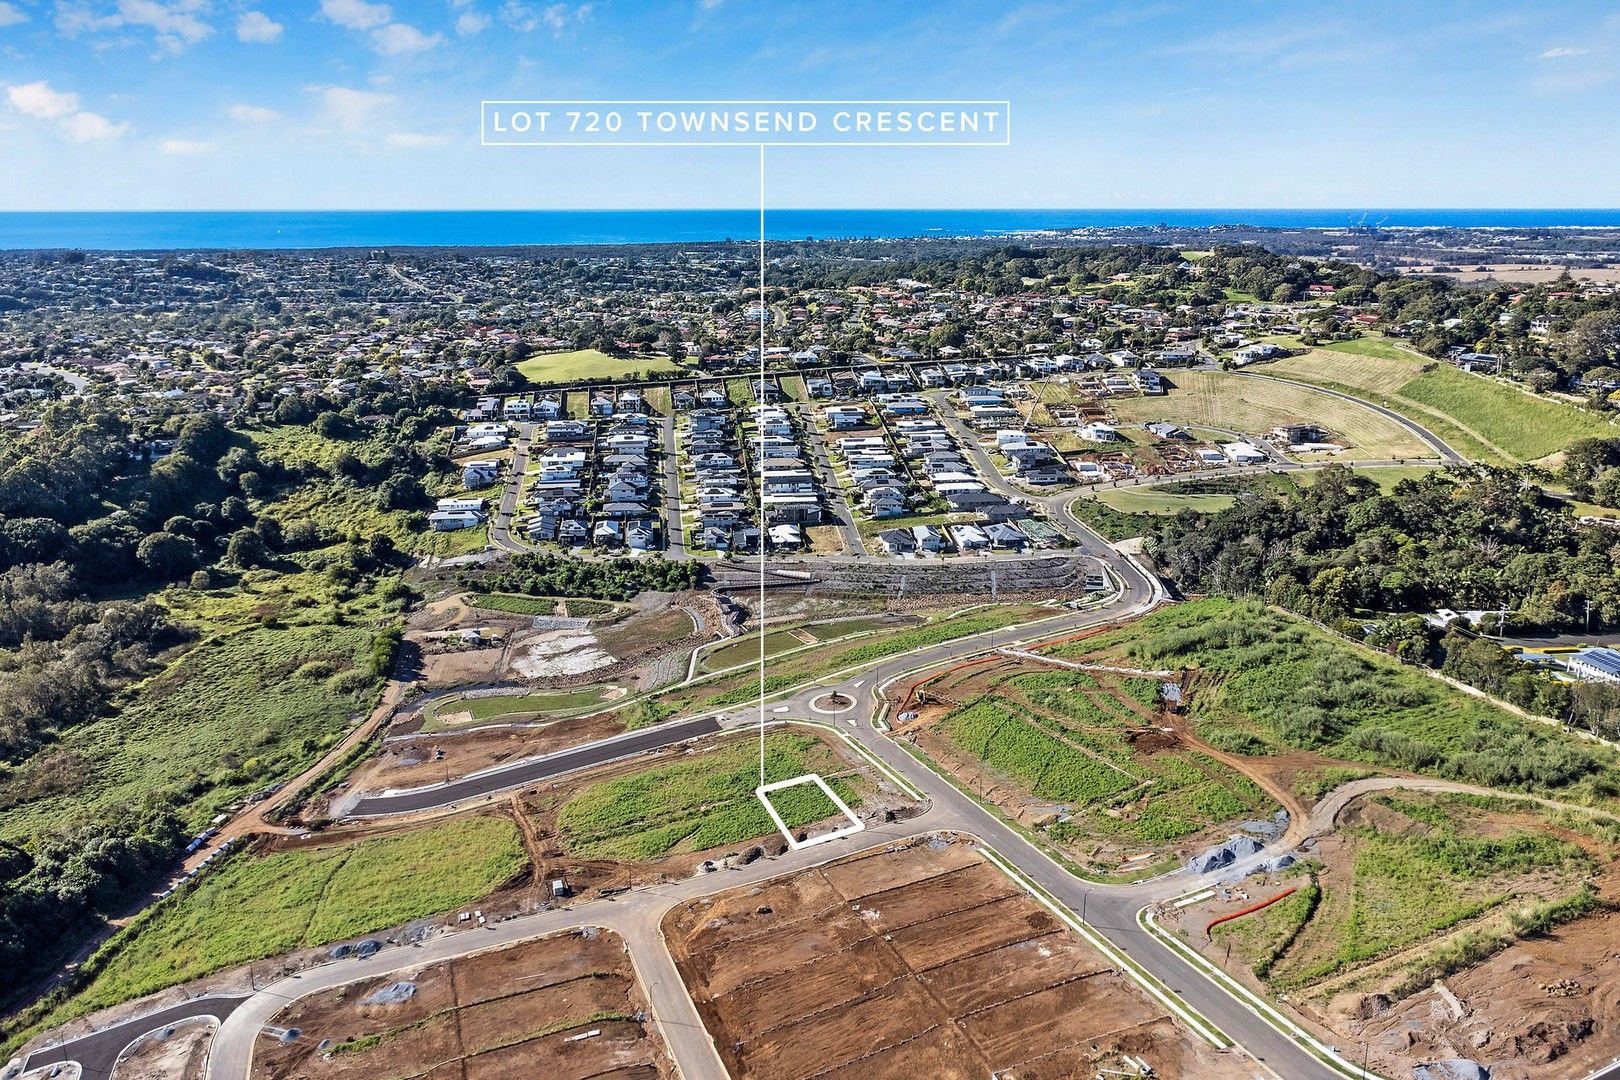 Lot 720 Townsend Crescent, Terranora NSW 2486, Image 0